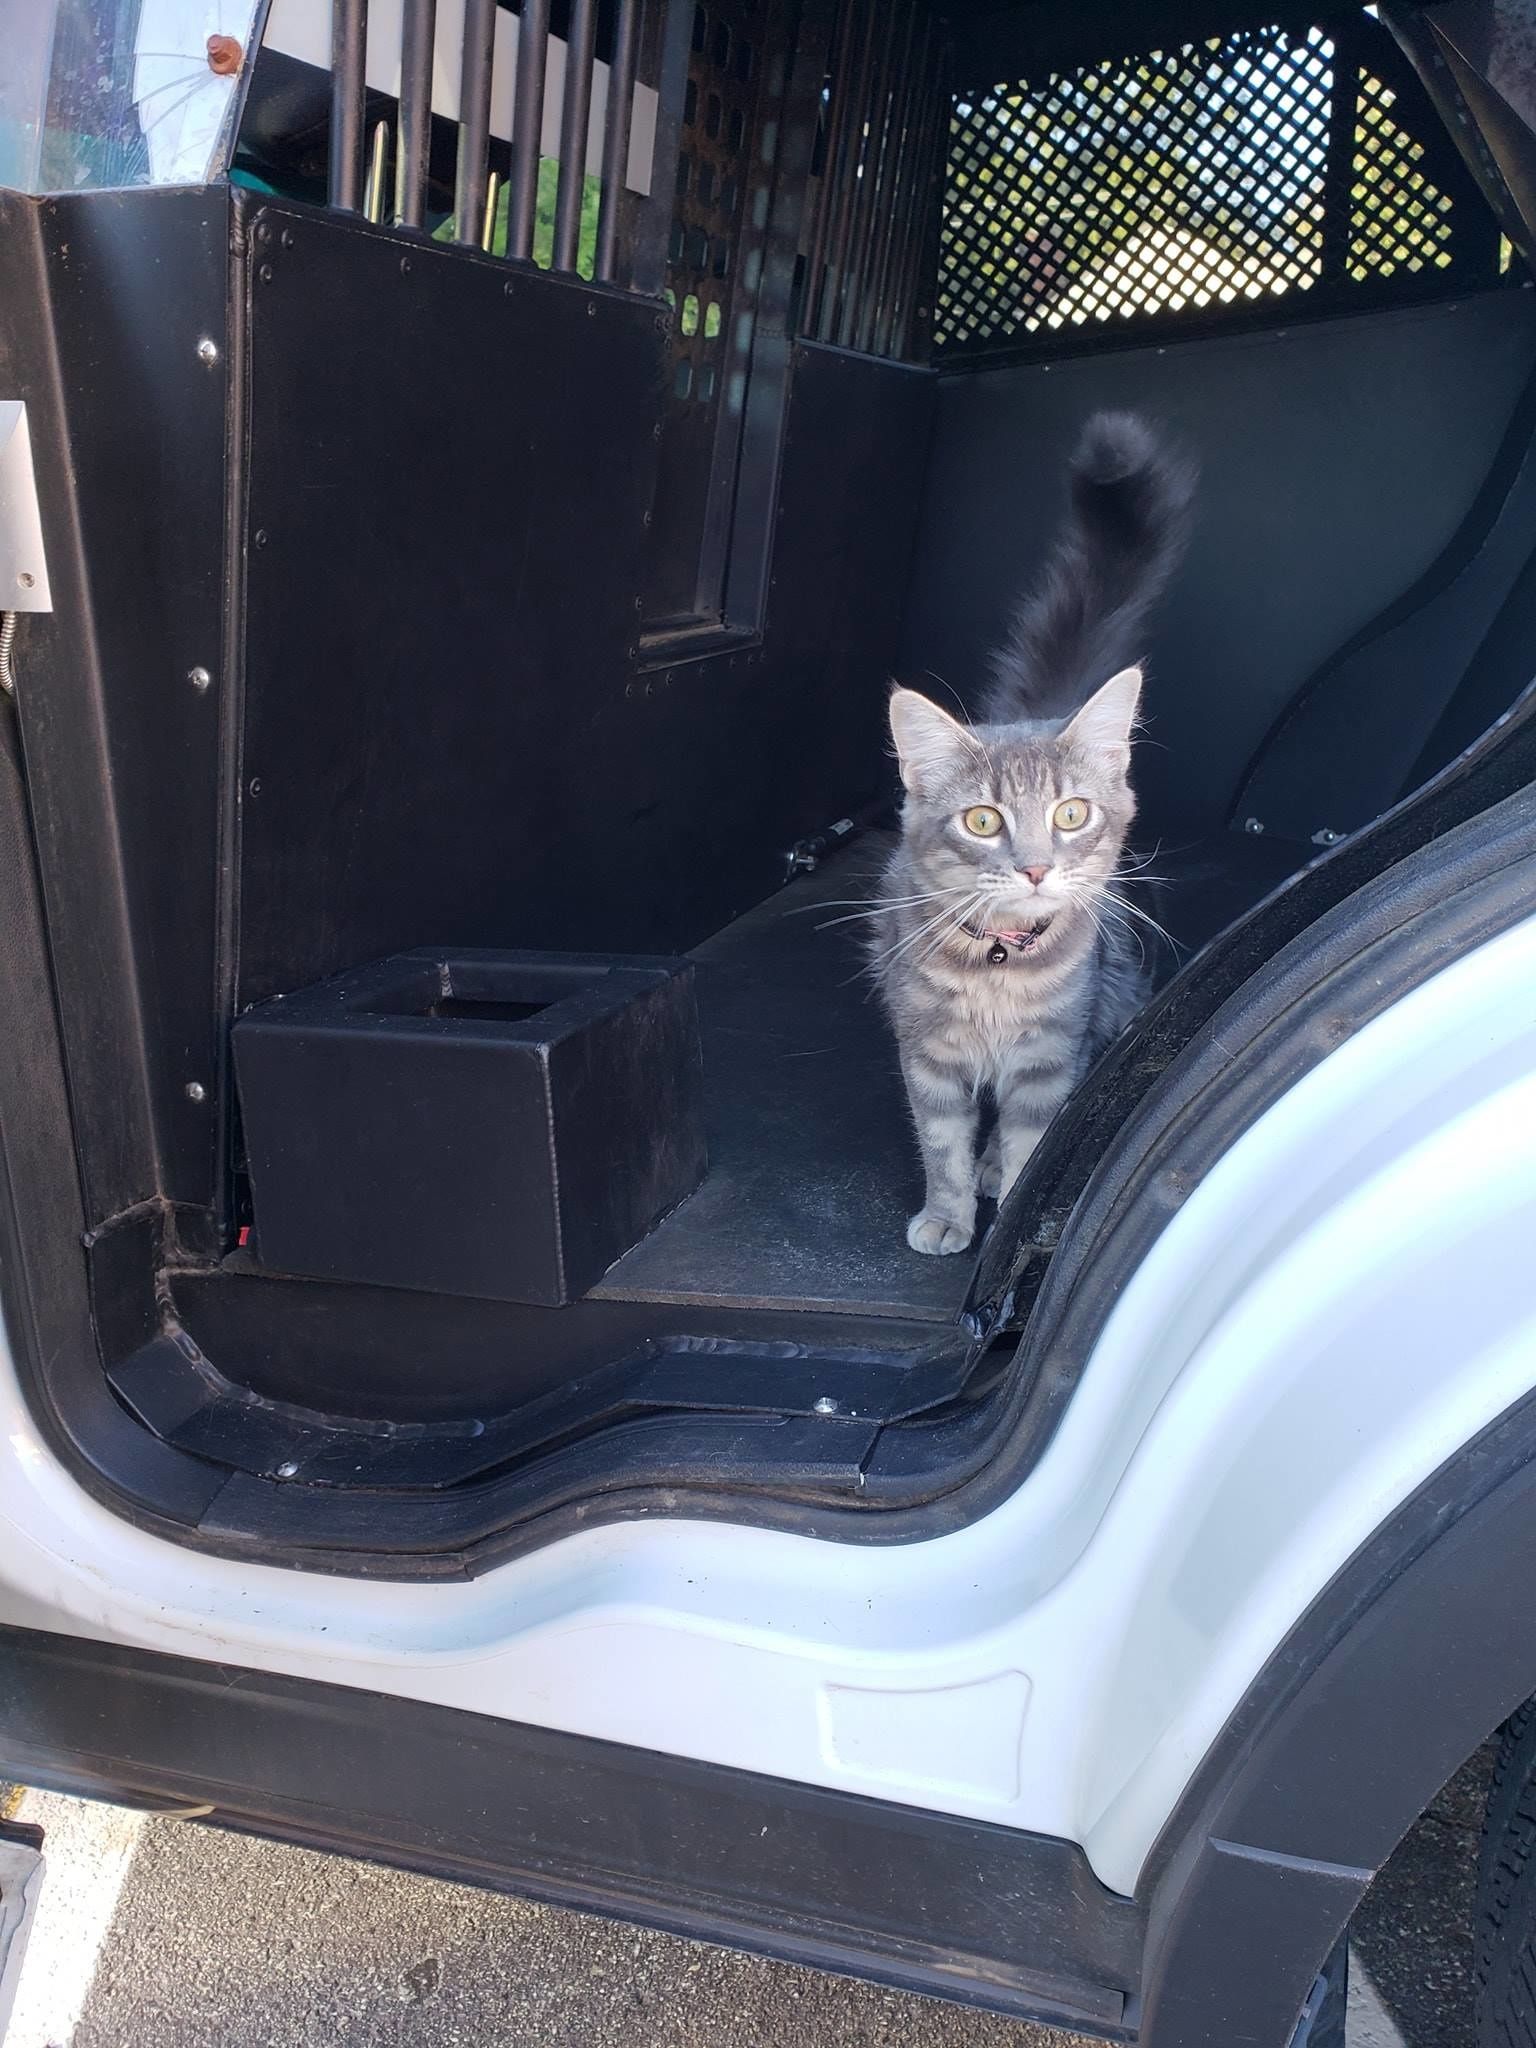 Carolina Beach Police Department shares update on kitten rescues